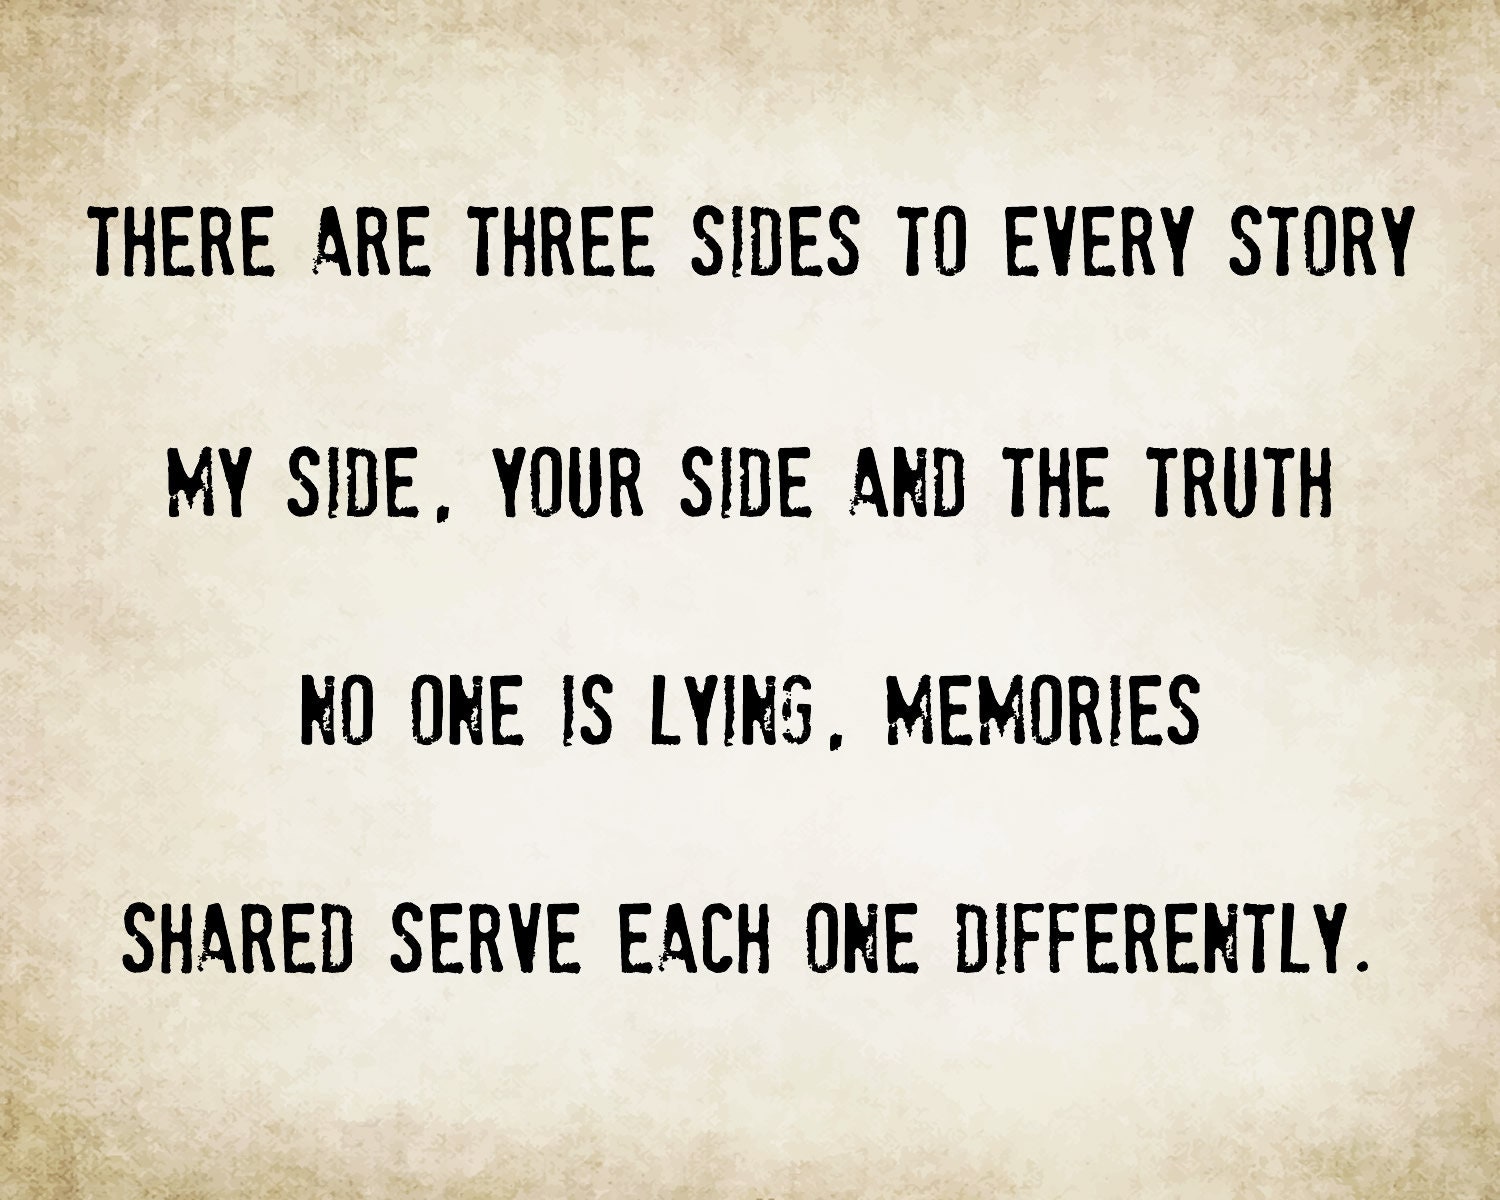 There are three sides to every story fridge magnet, large 10 inch wide by 8 inch high premium fridge magnet that stands out.